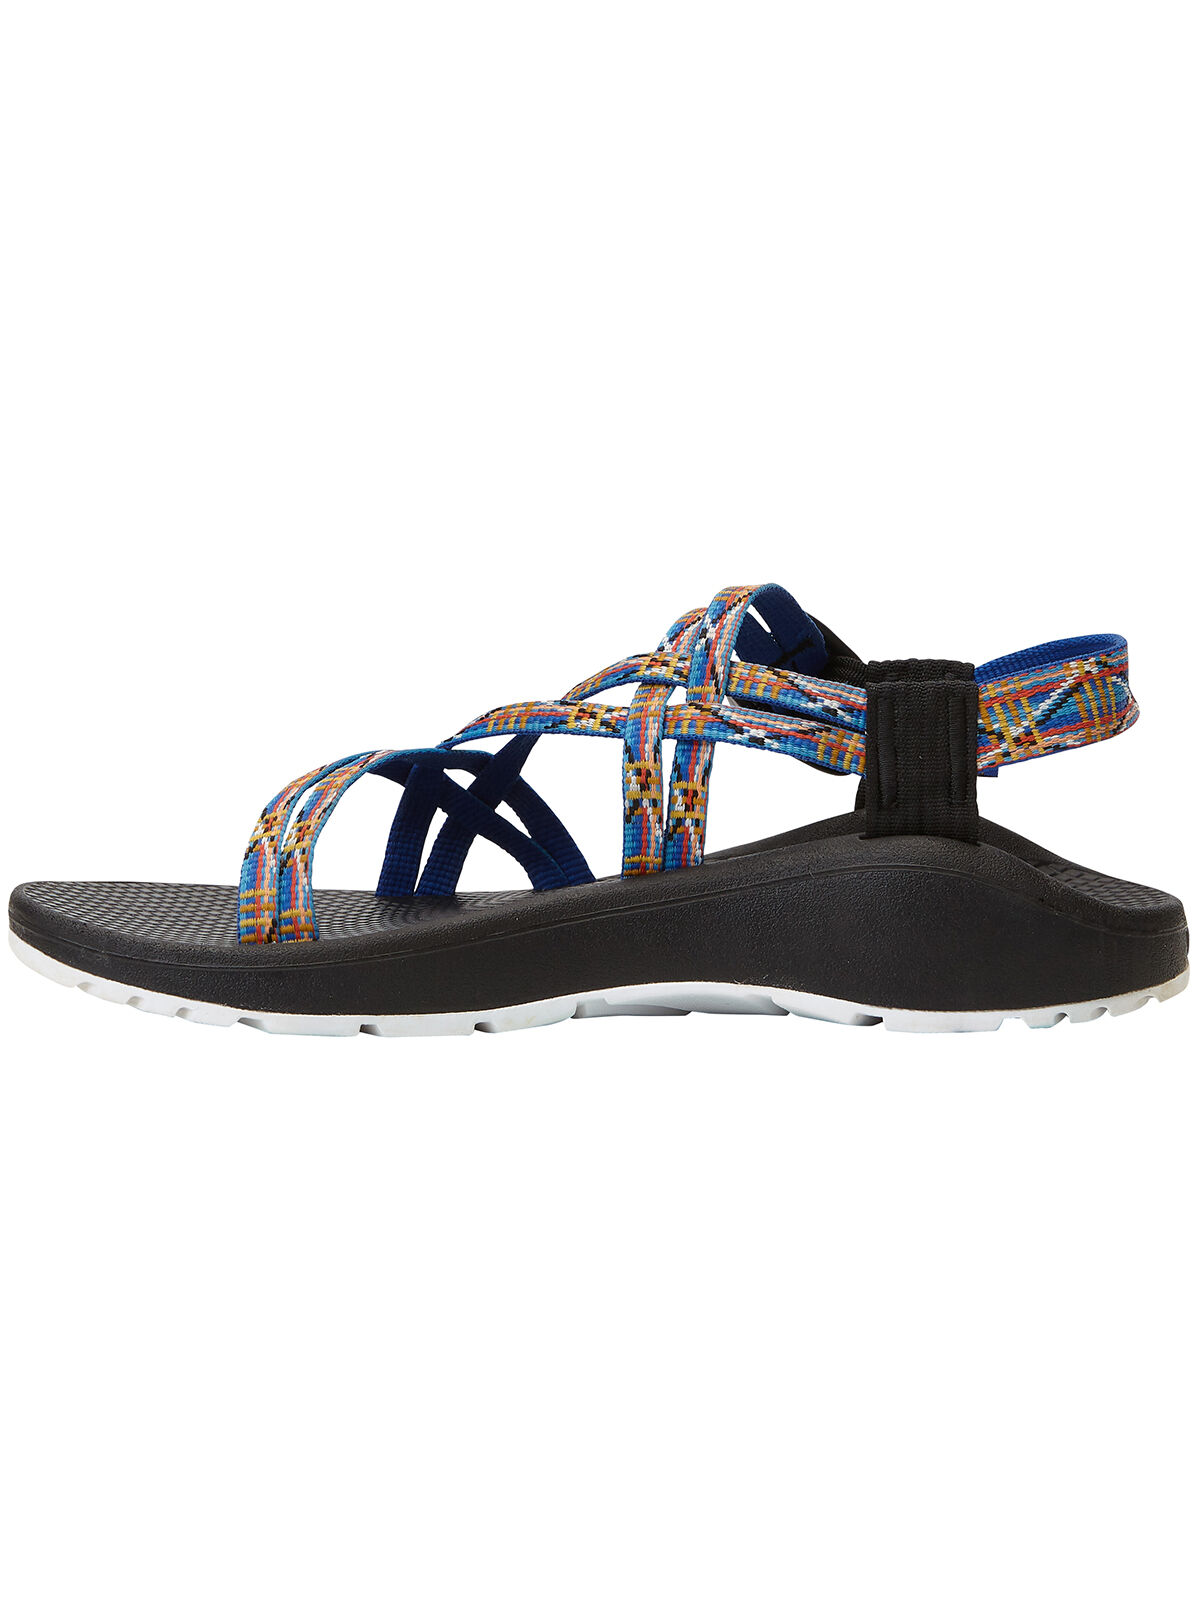 chacos womens 9